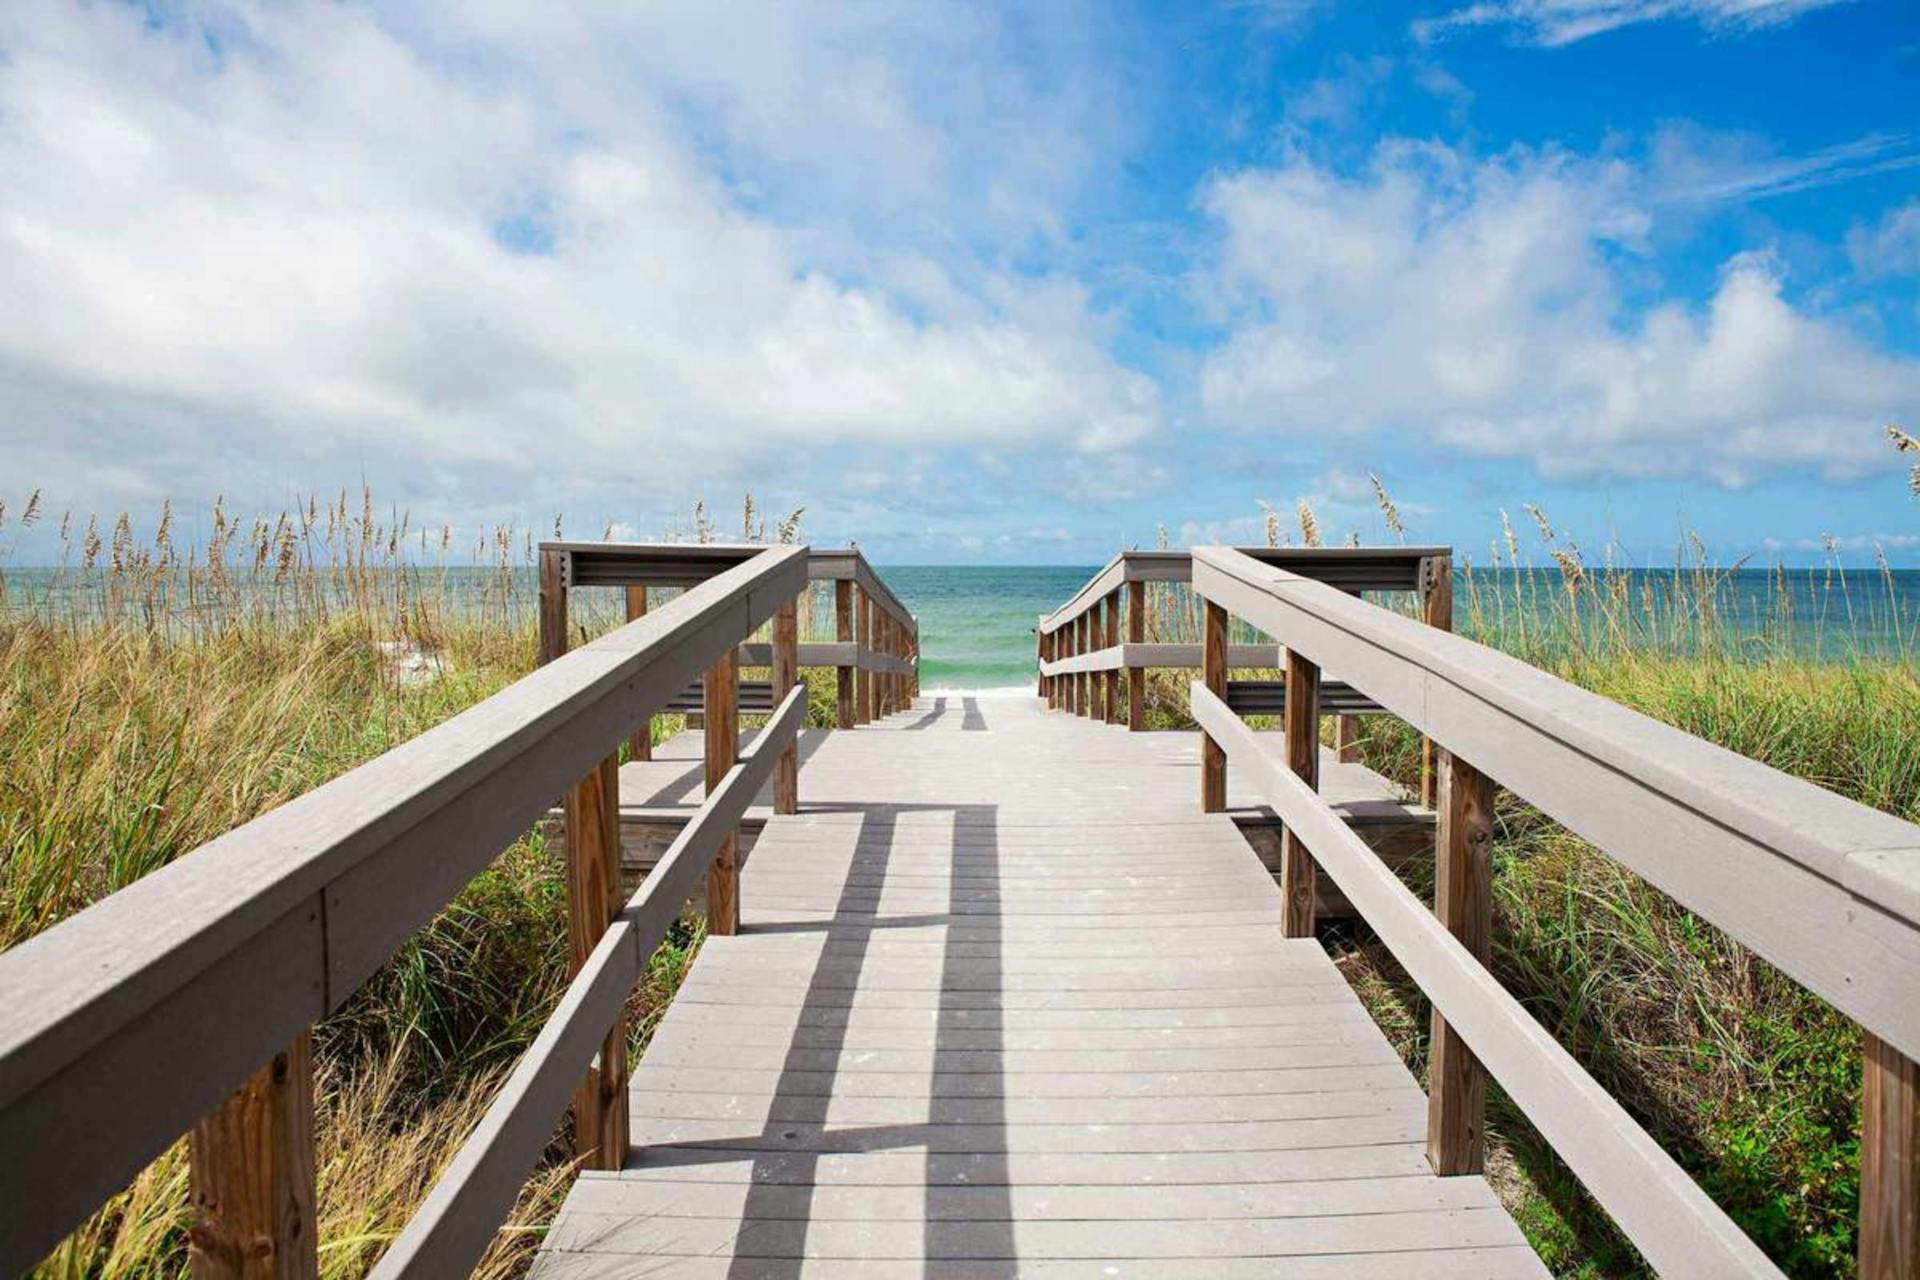 The 10 Best Campgrounds Near St. Petersburg, FL